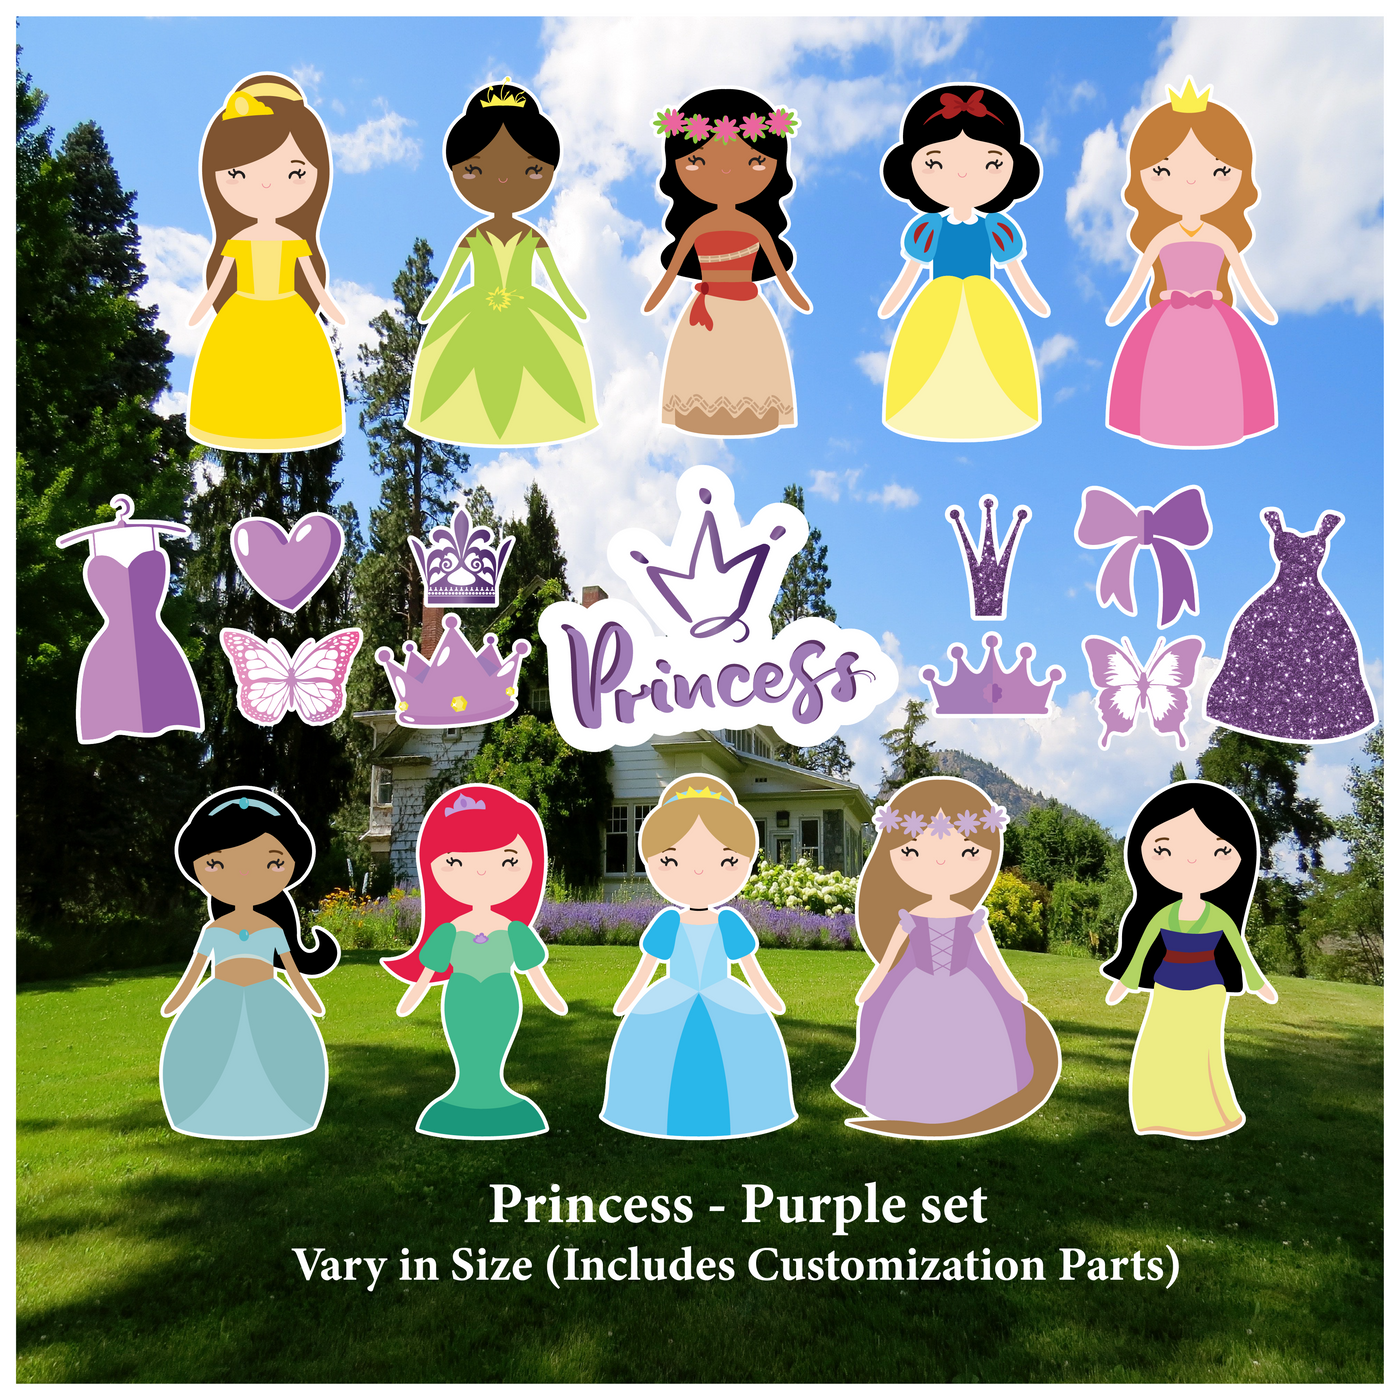 Princess Characters with Purple Decorations Set